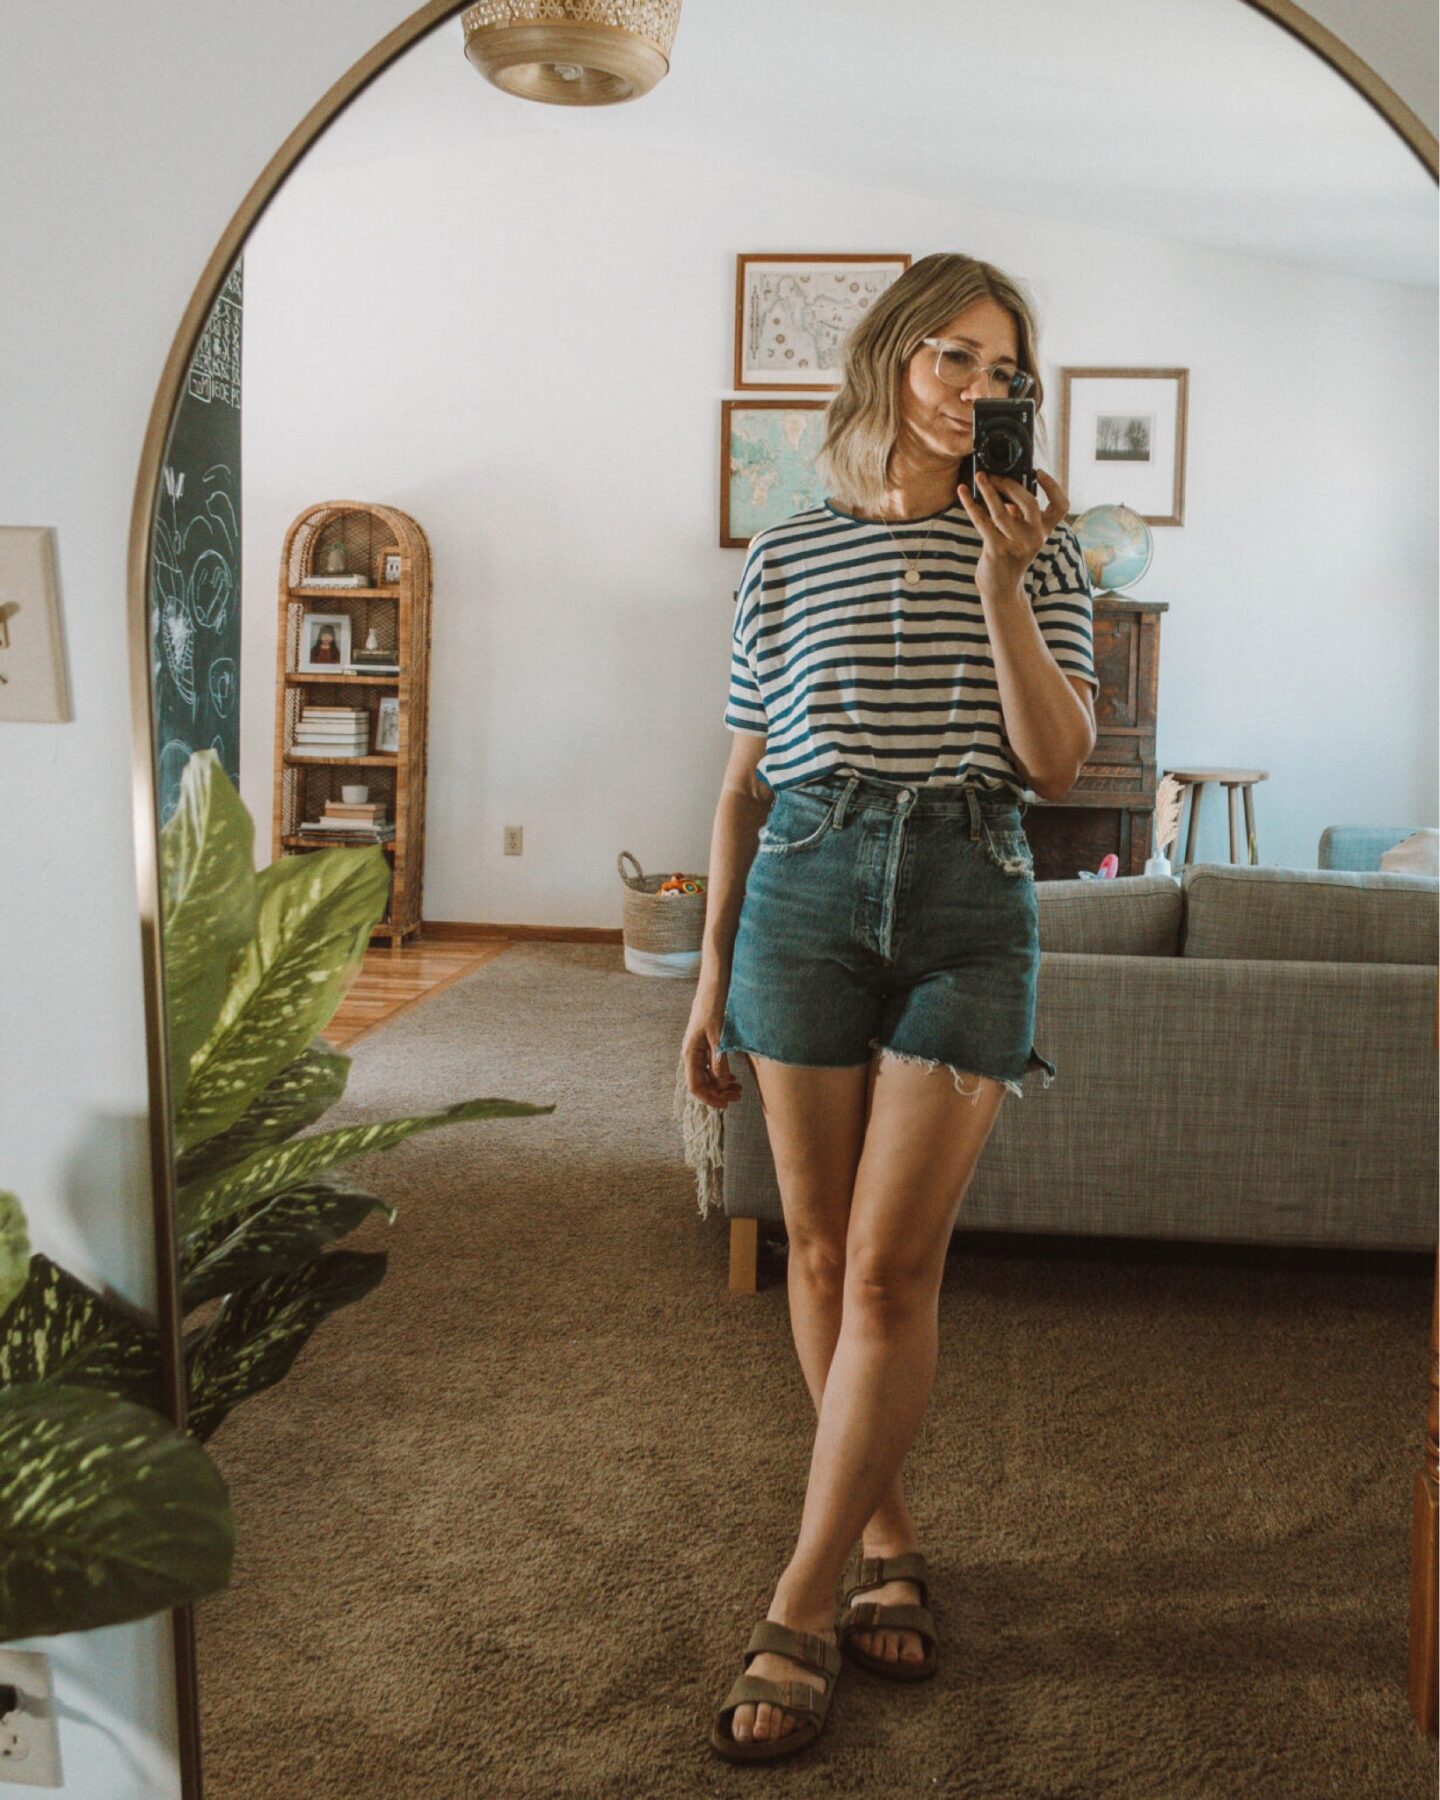 Karin Emily wears her favorite denim shorts with a striped tee